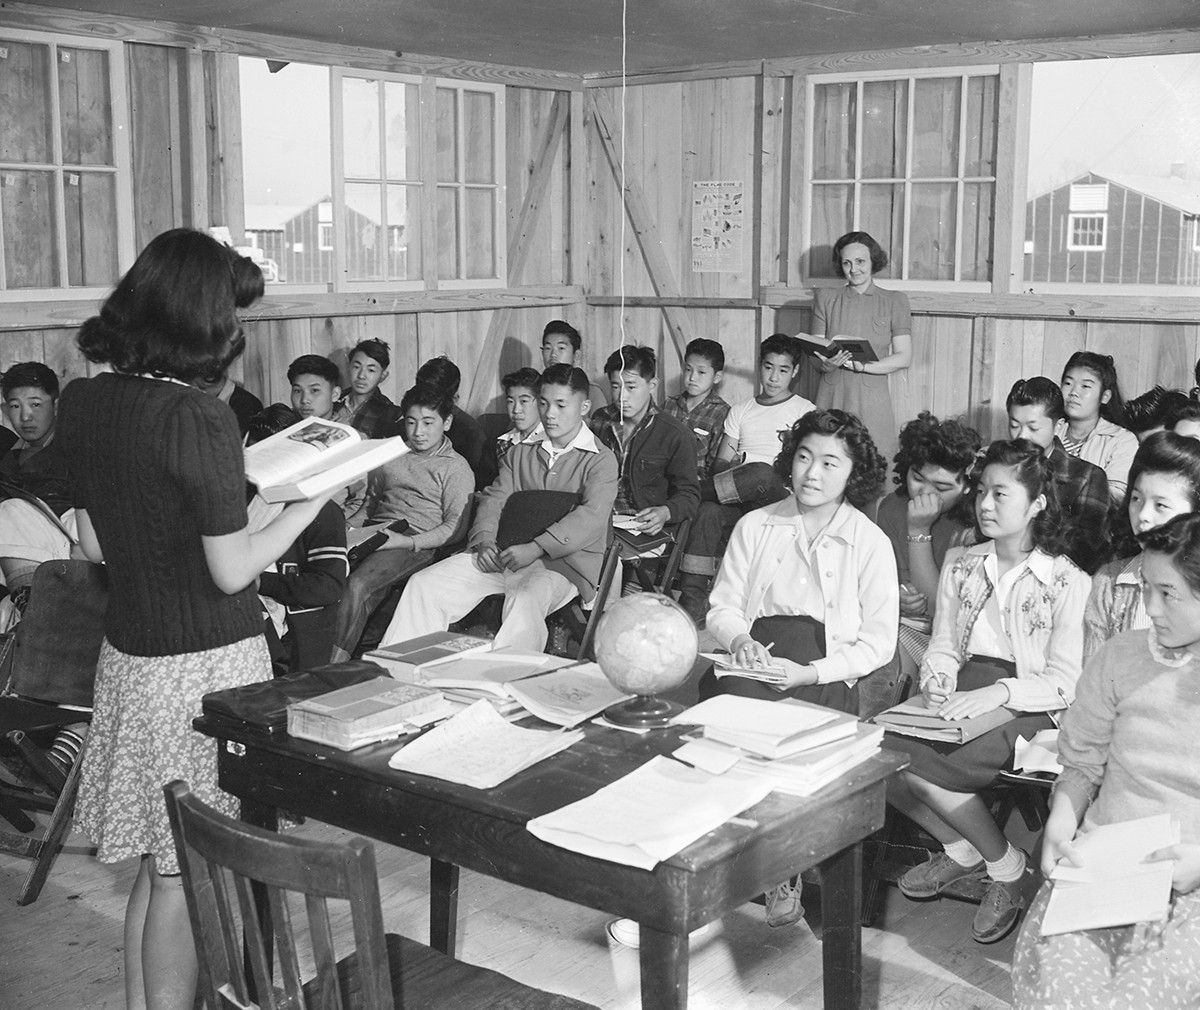 A teacher reads from a book in front of a classroom of children.